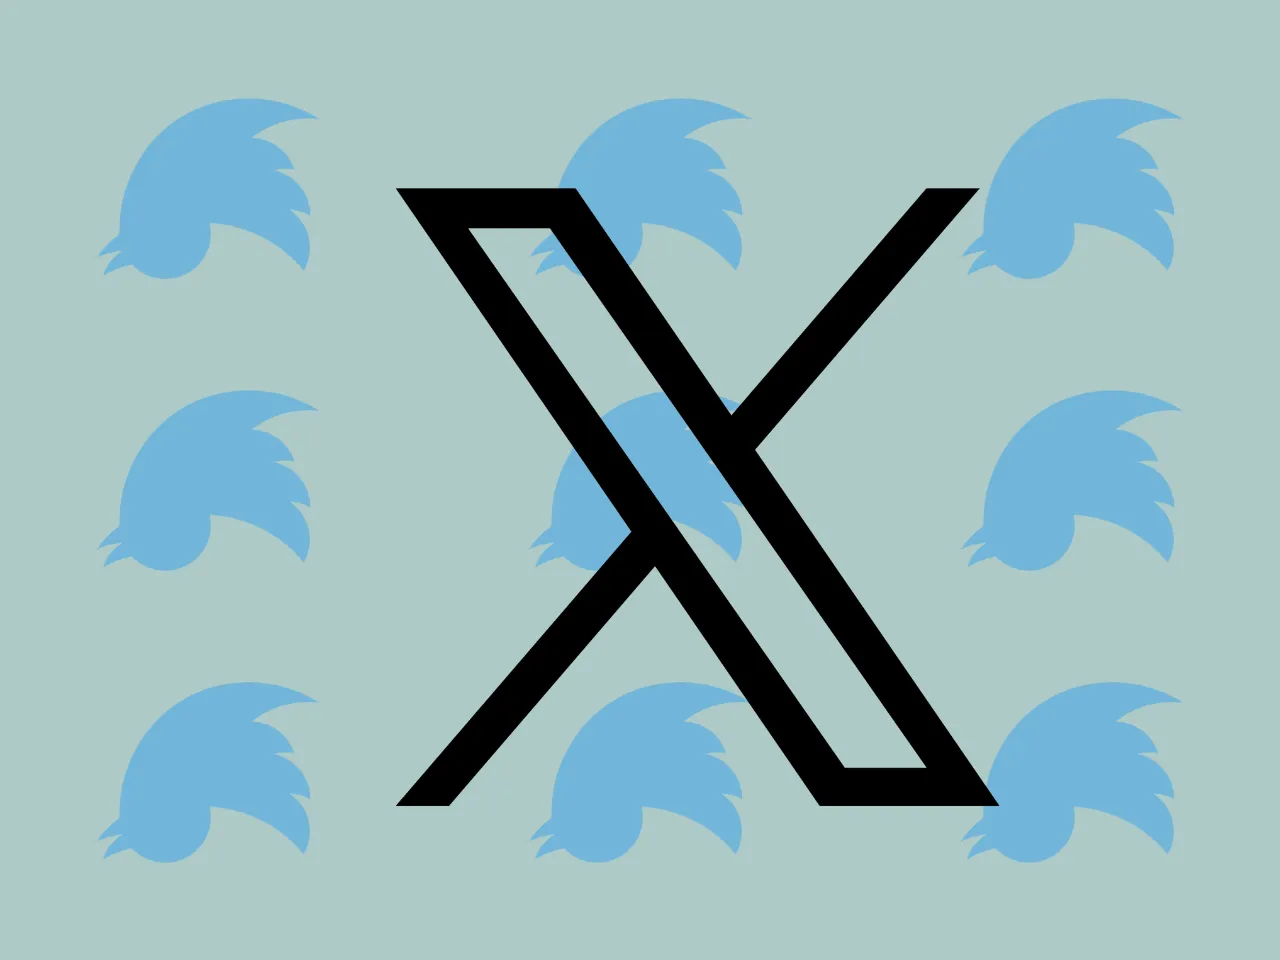 3 months of rebranding: Why experts prefer Twitter over X